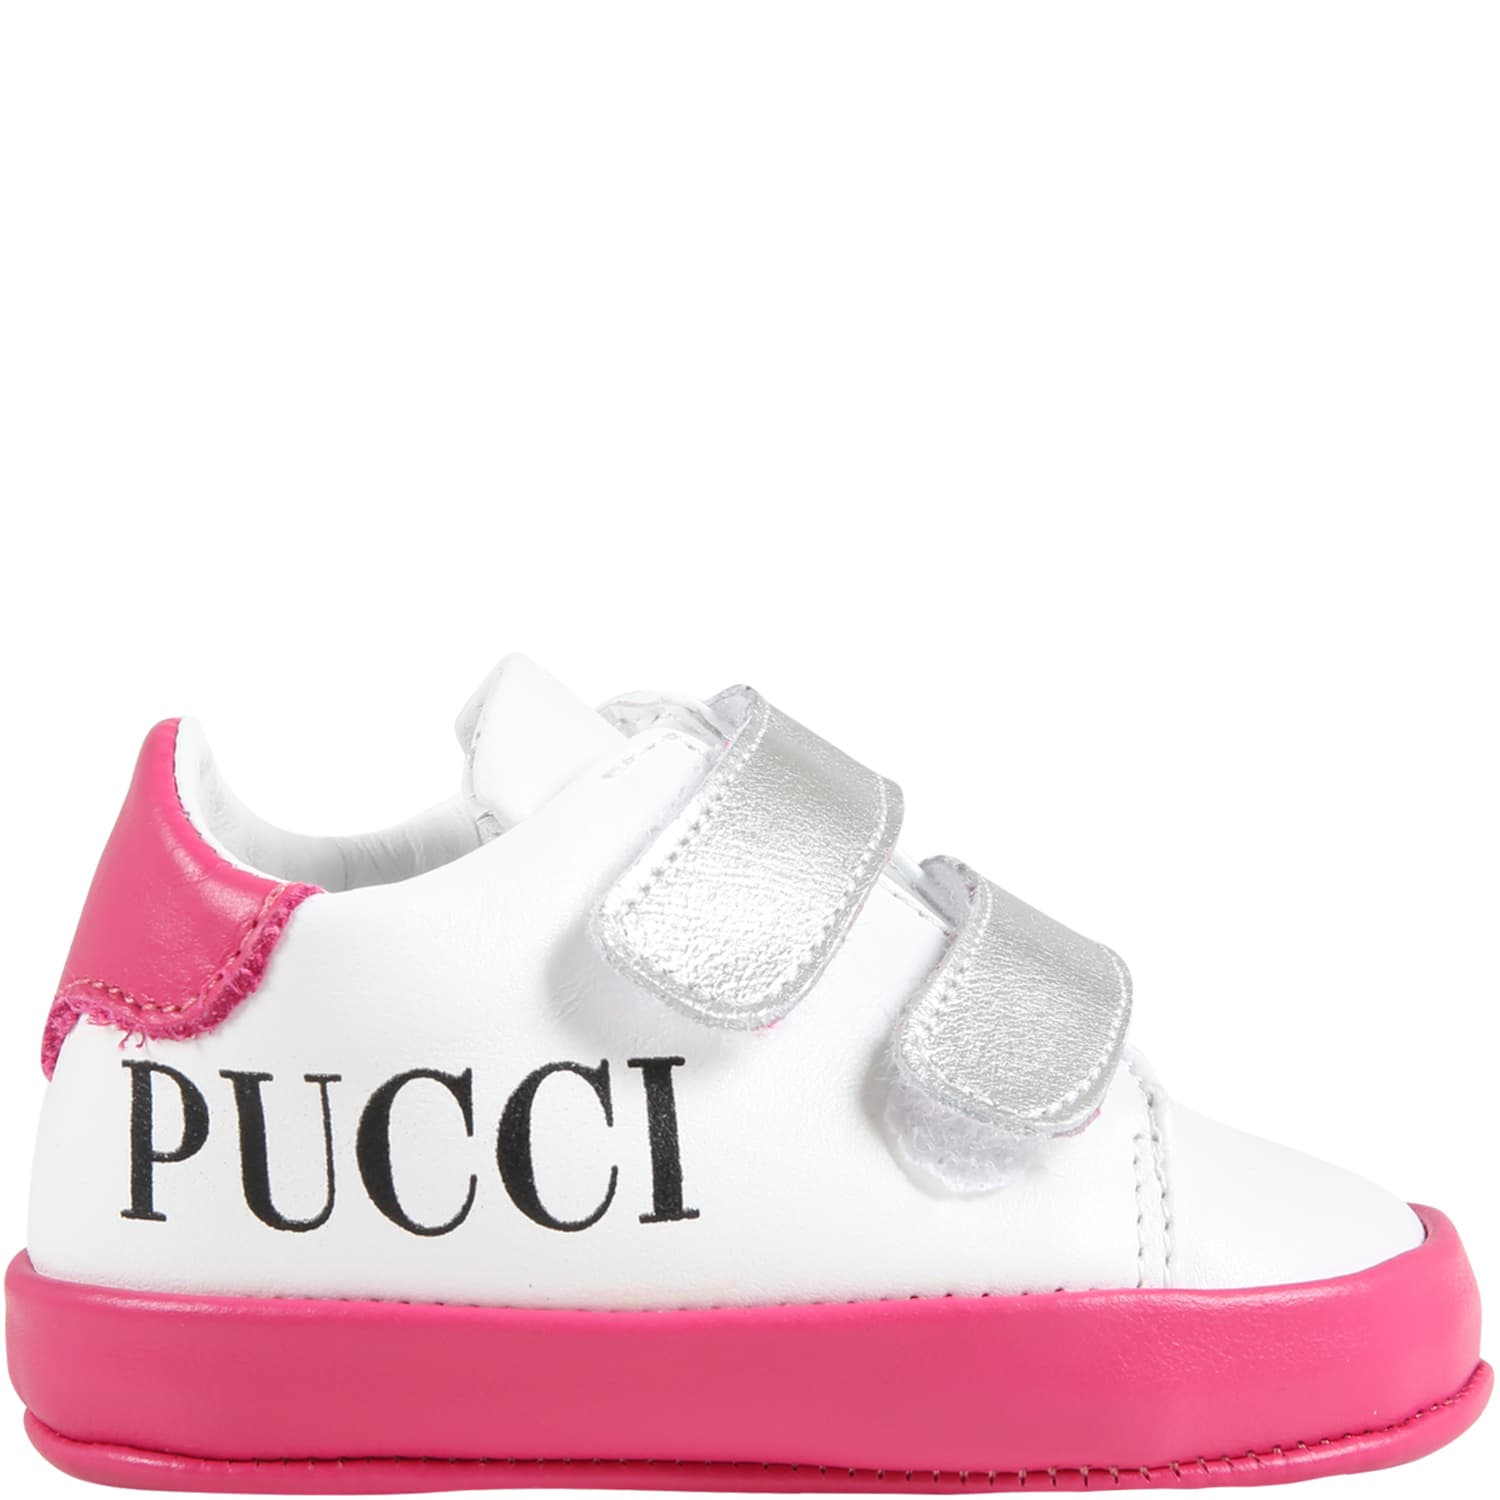 Emilio Pucci Multicolor Sneakers For Baby Girl